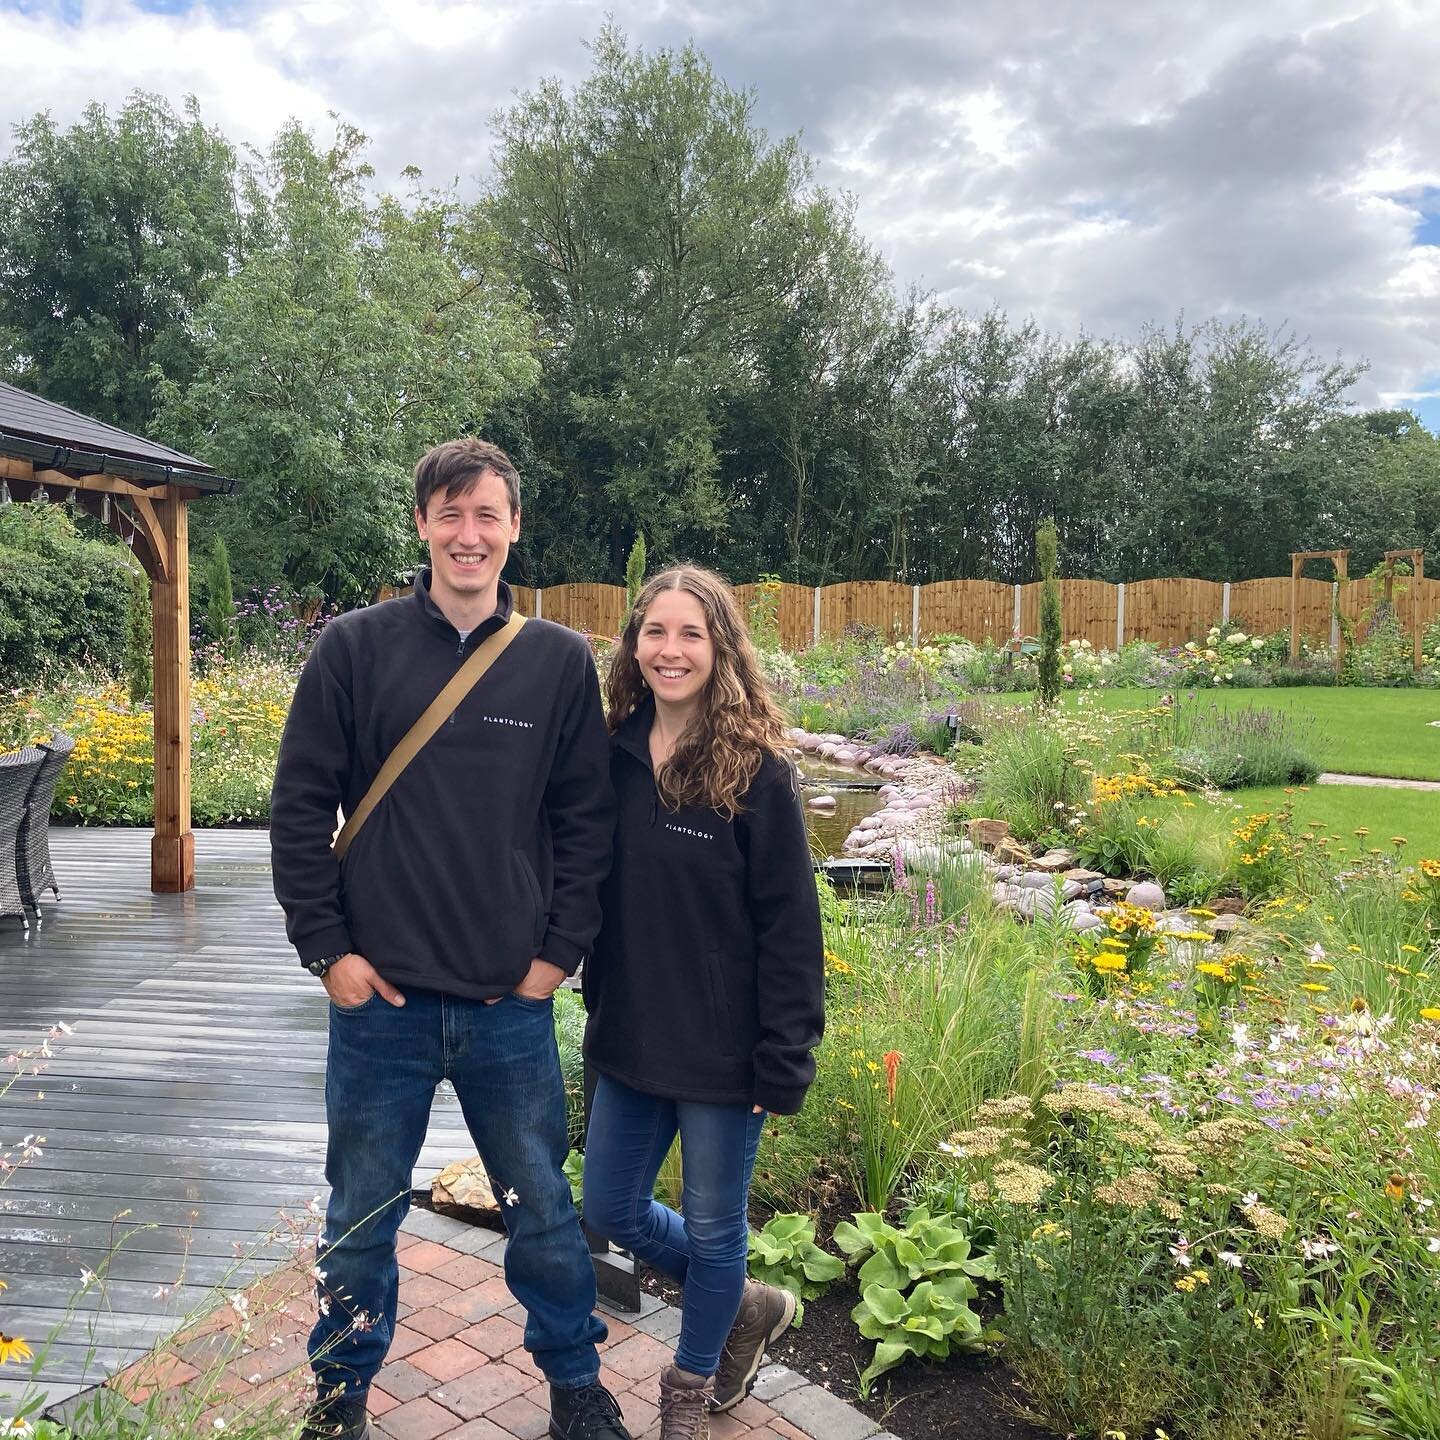 Thank you and hi to all our new followers 👋 

We have never actually introduced ourselves on here so here goes&hellip; 

We are Sam and Hayley. We met at University of Sheffield studying Landscape Architecture. 

Short story: We have since started a